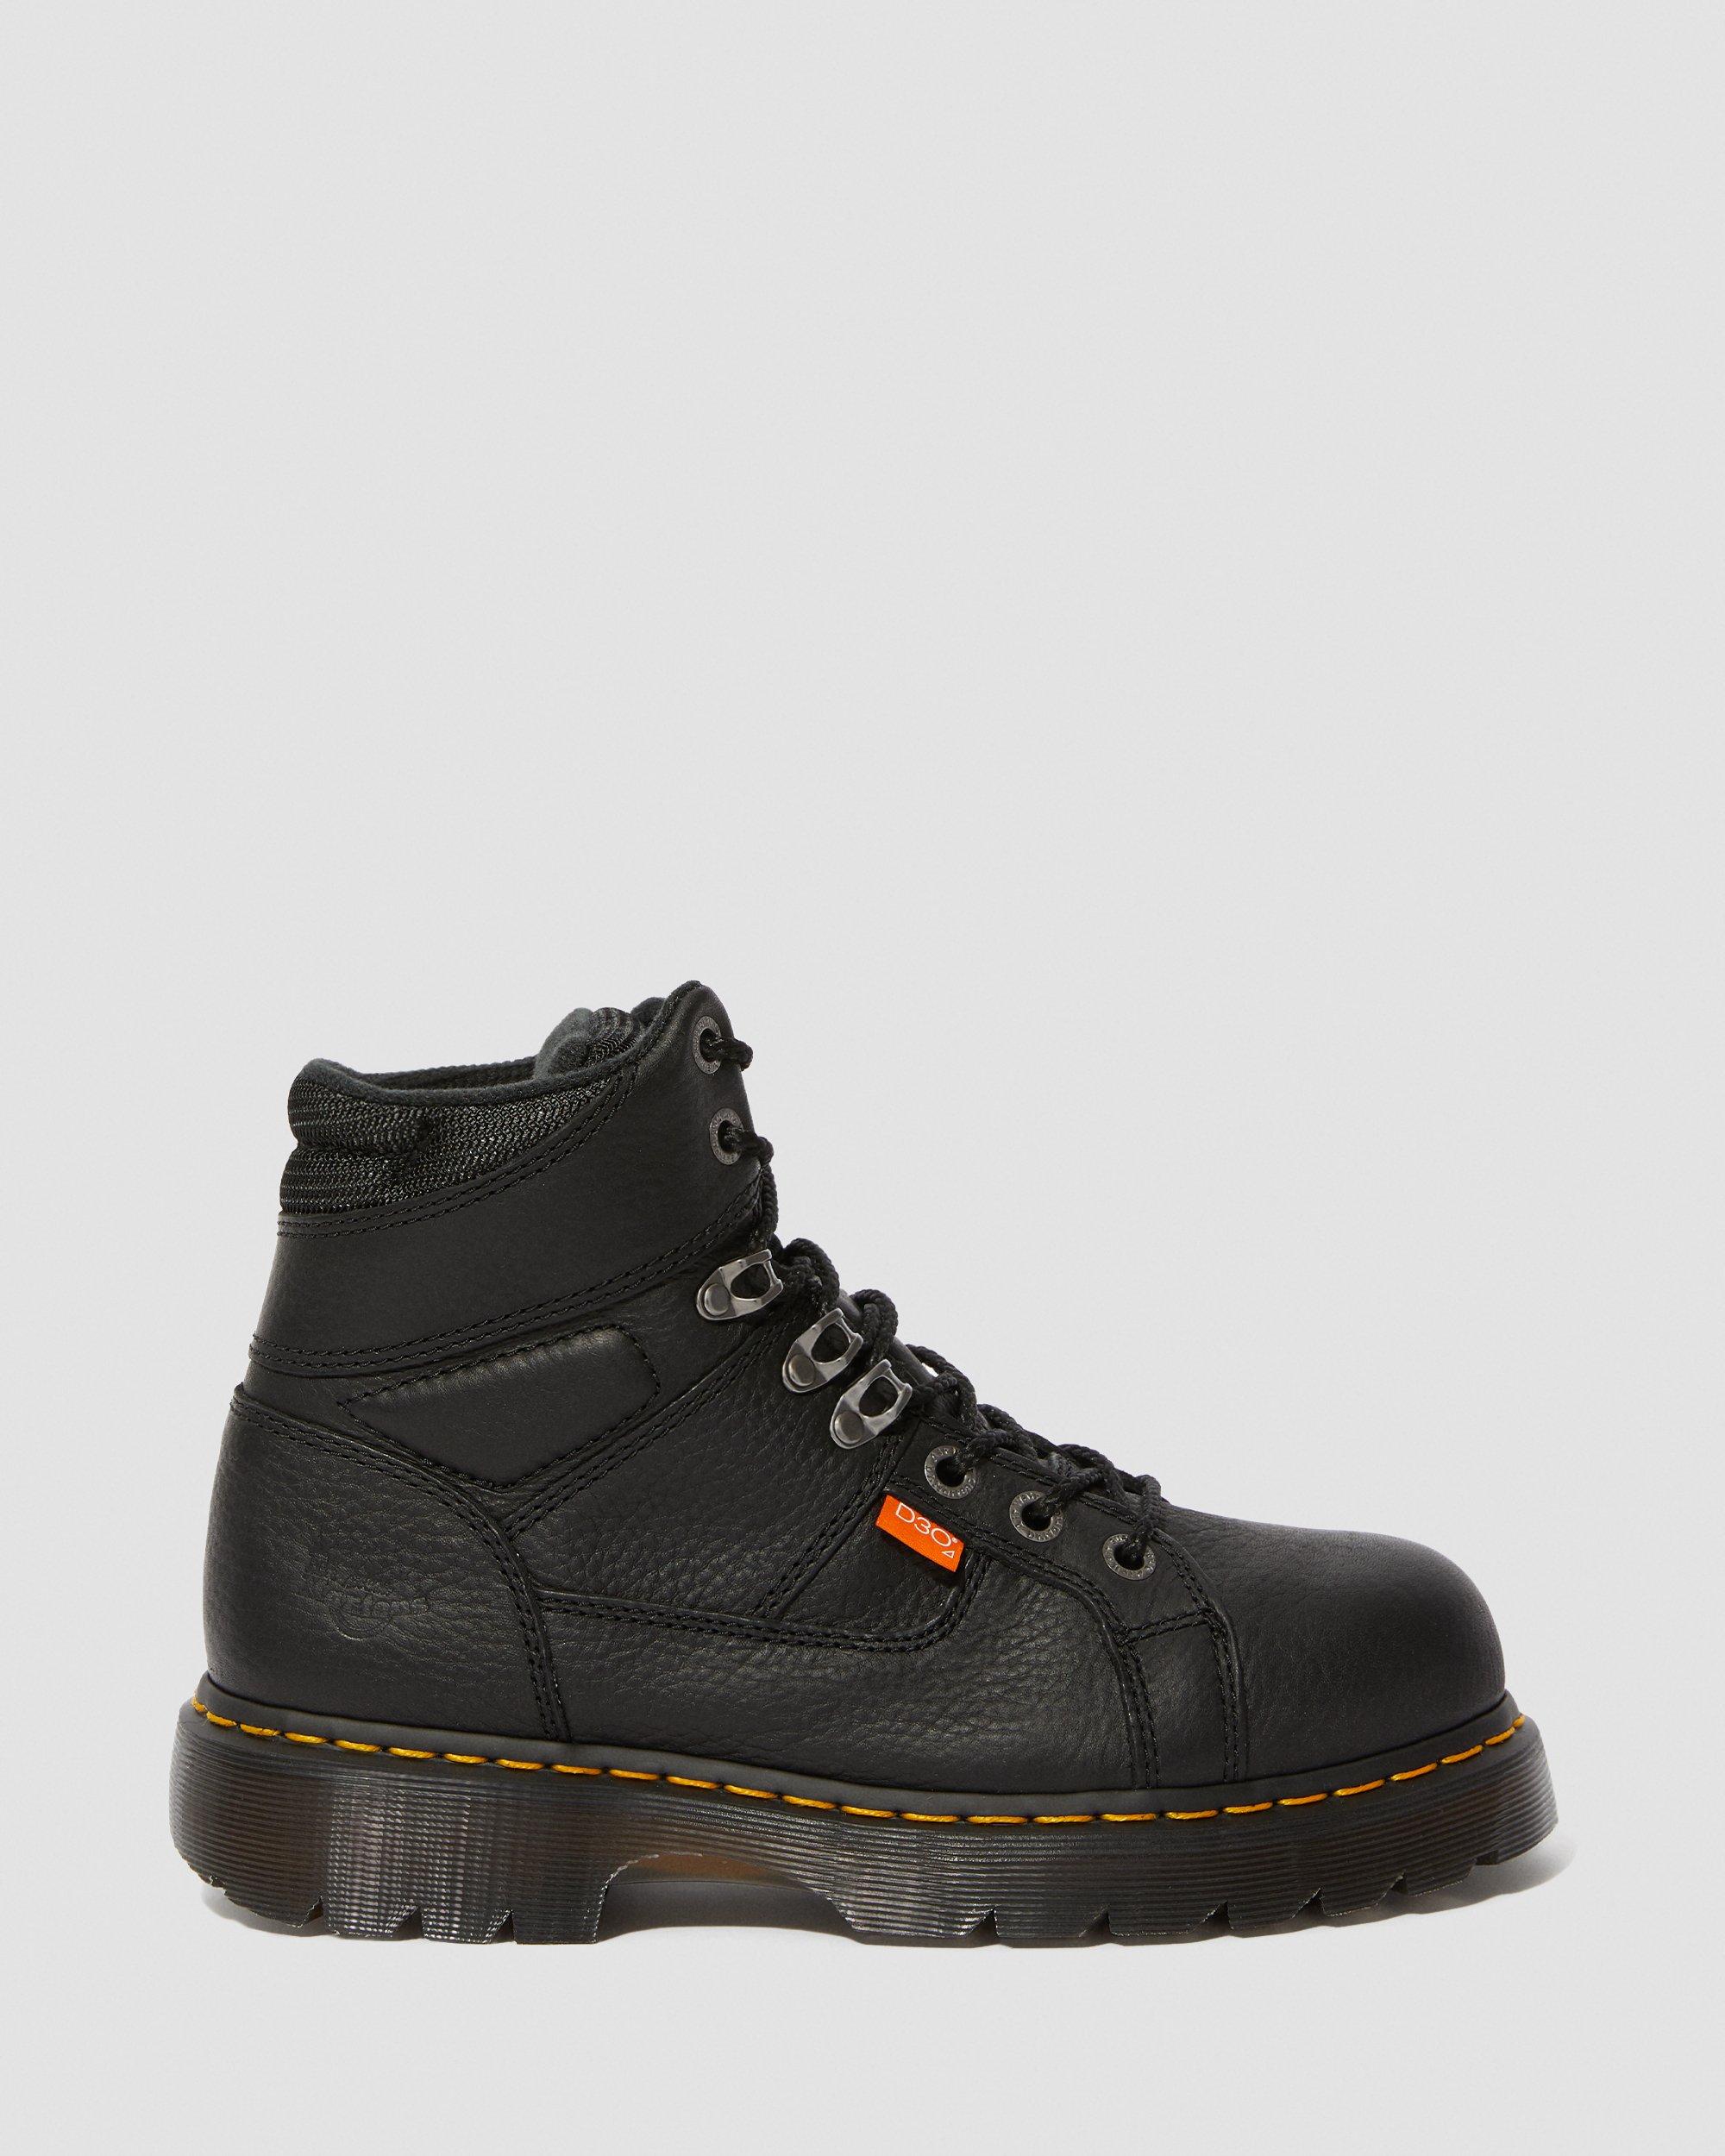 DR MARTENS Ironbridge Extra Wide Grizzly Met Guard Work Boots